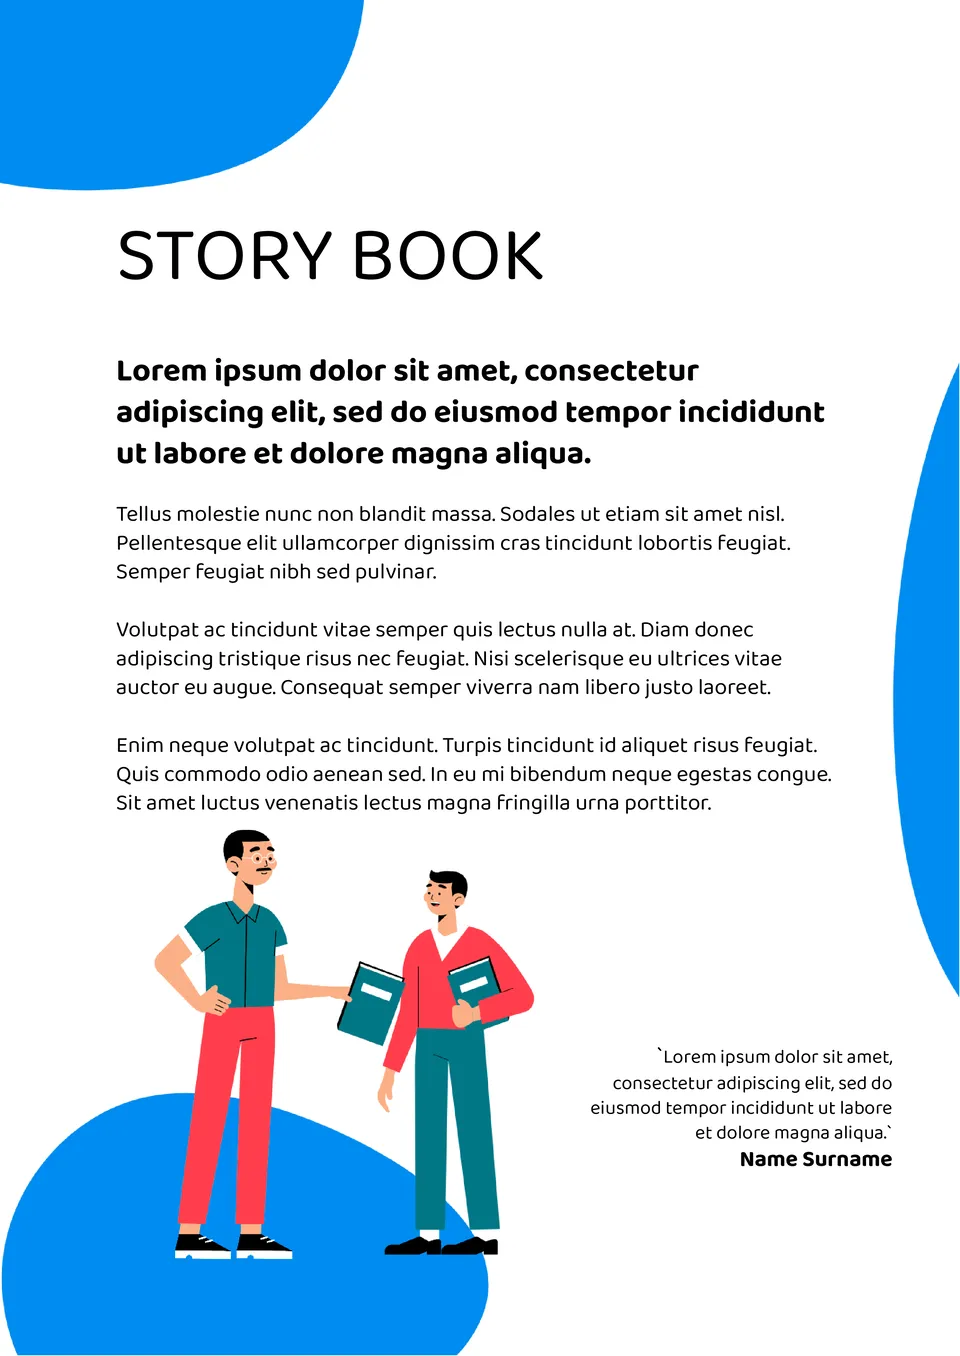 Story Book Template